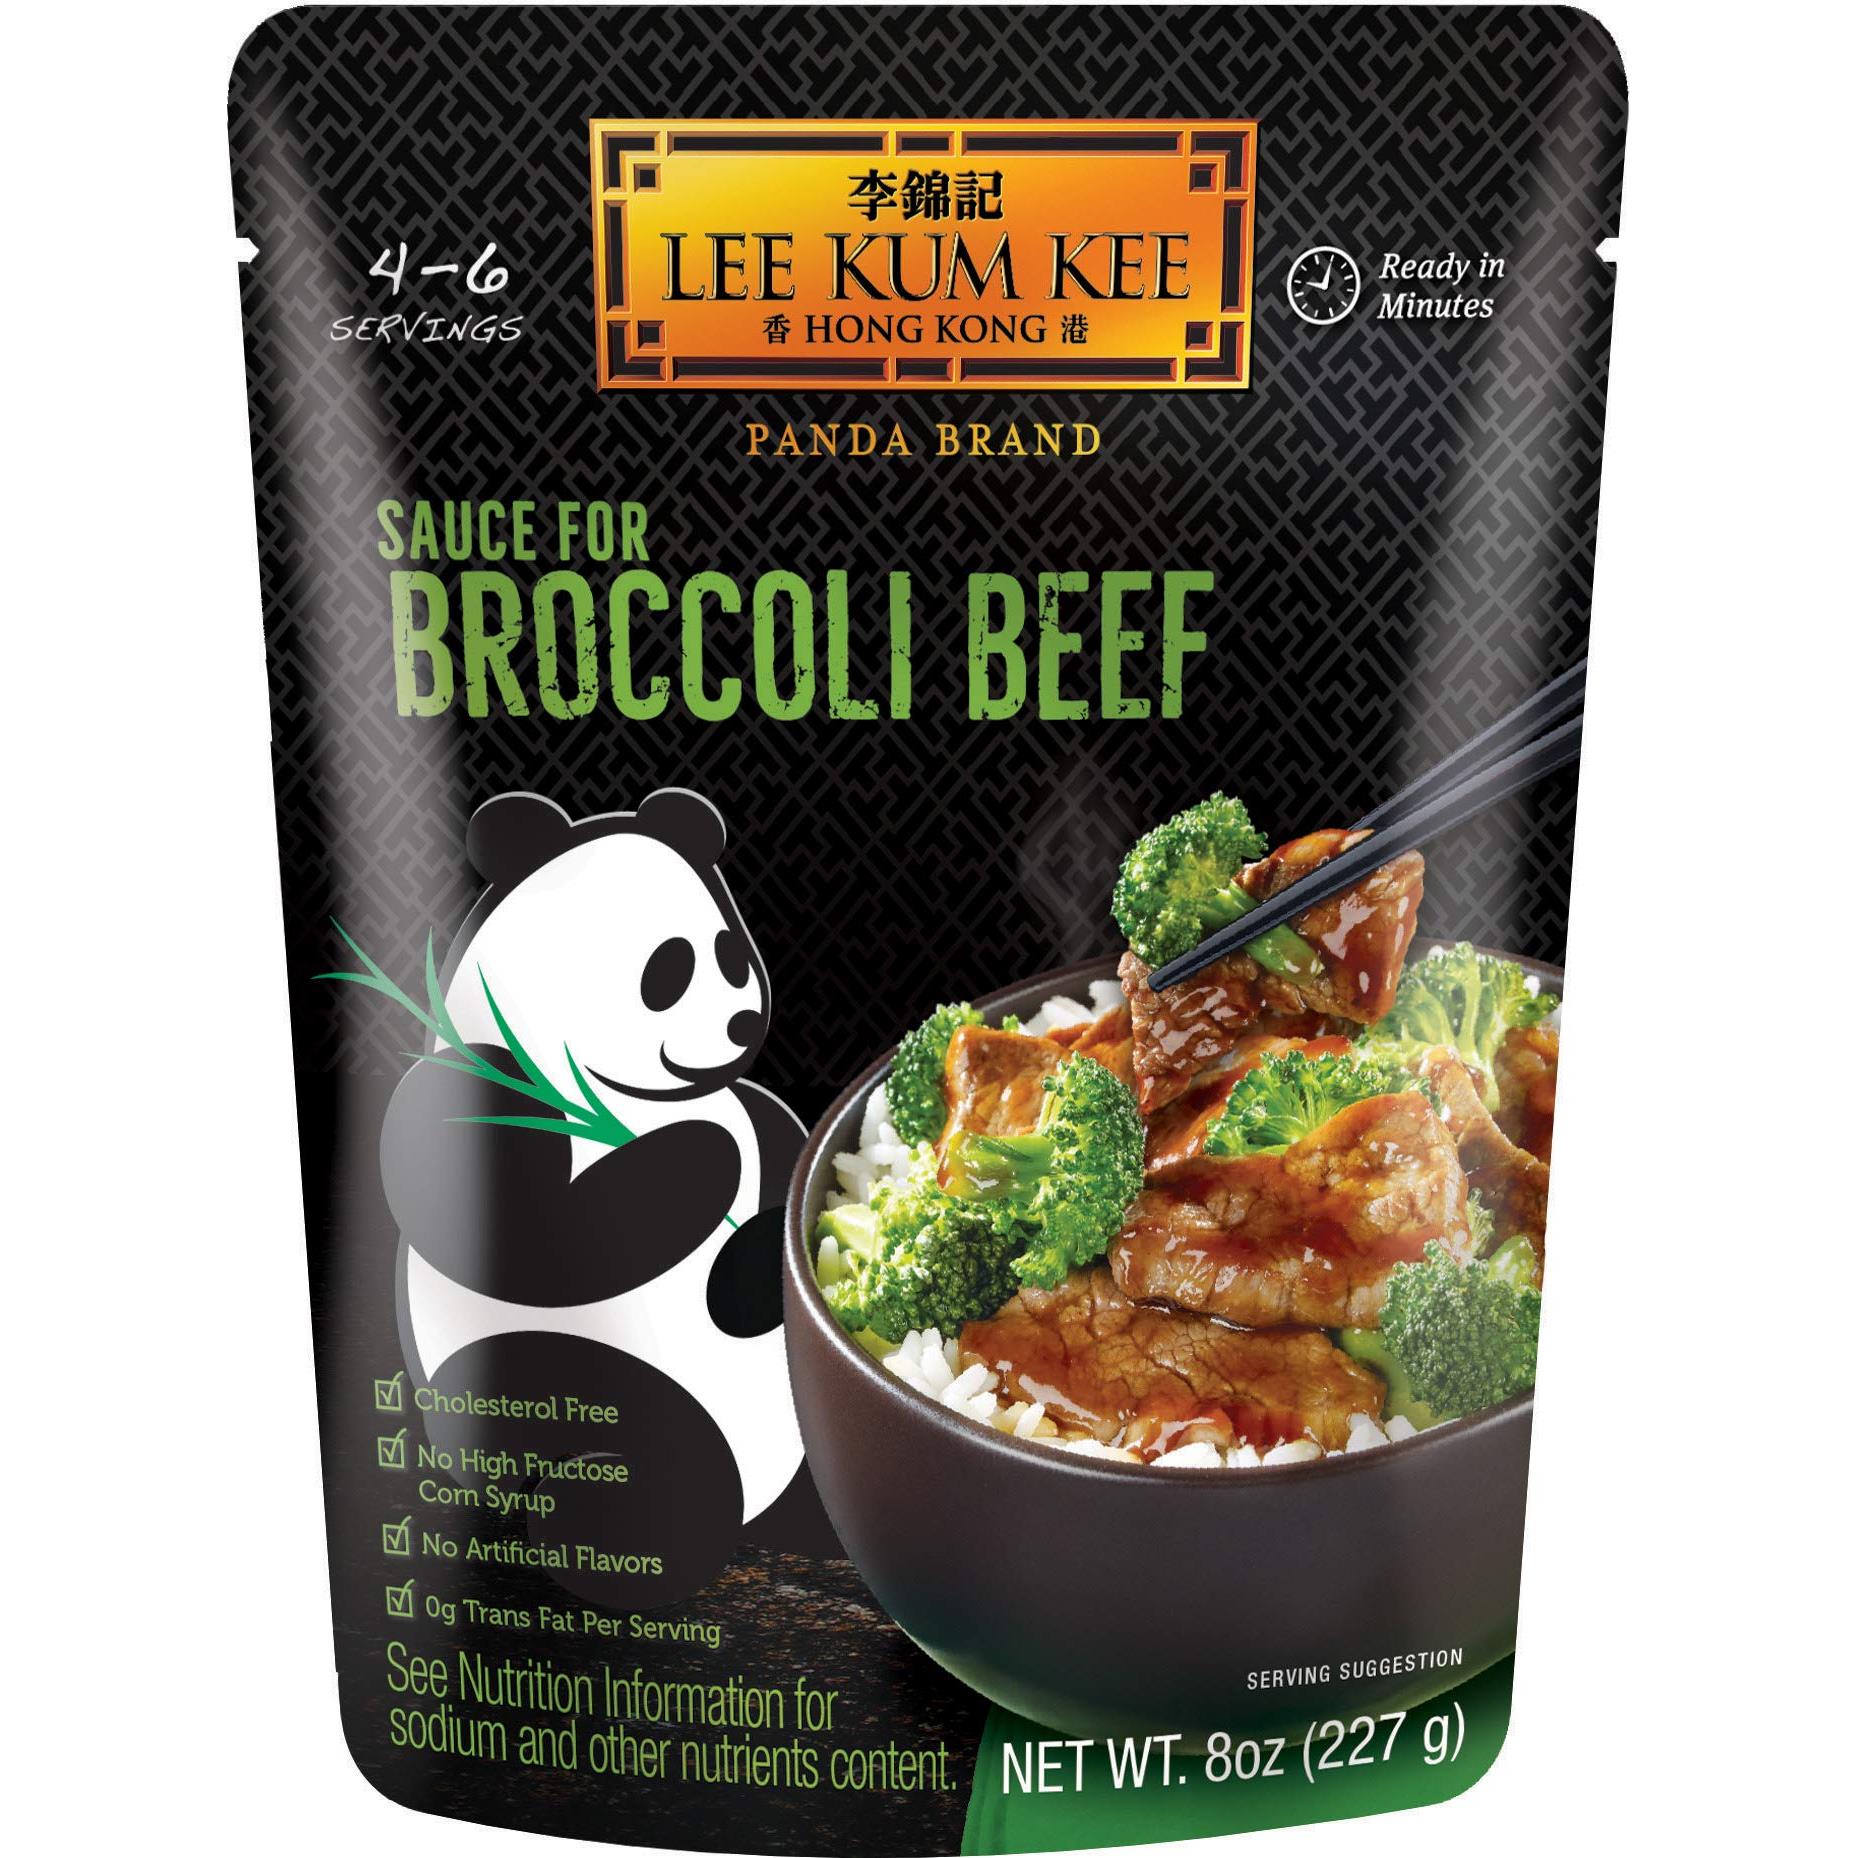 Lee Kum Kee Sauce for Broccoli Beef, 4-6 Servings 0g Trans Fat, No Artificial Flavors, No High Fructose Corn Syrup, Cholesterol Free, 8OZ (Pack of 6)